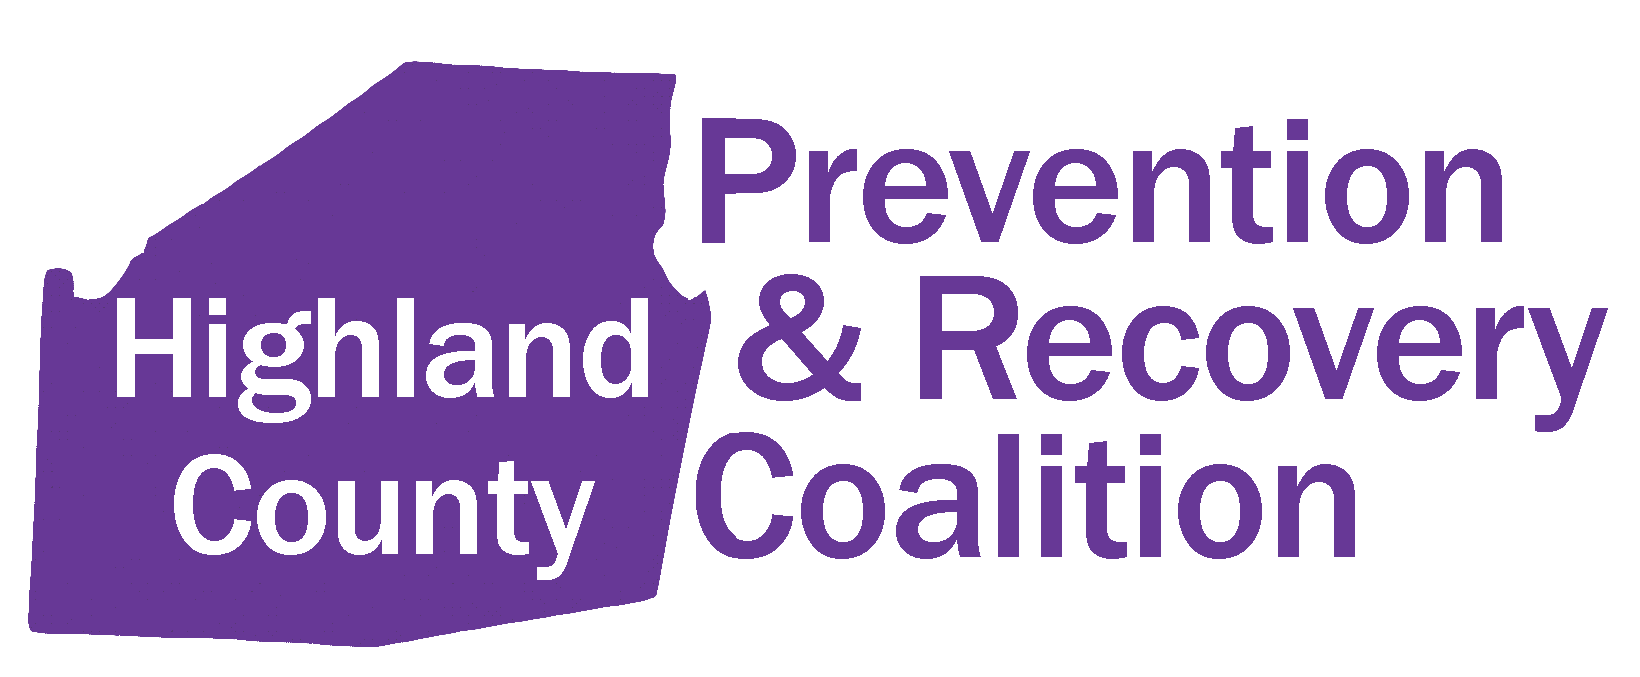 Highland County Prevention and Recovery Coalition (HCPARC)